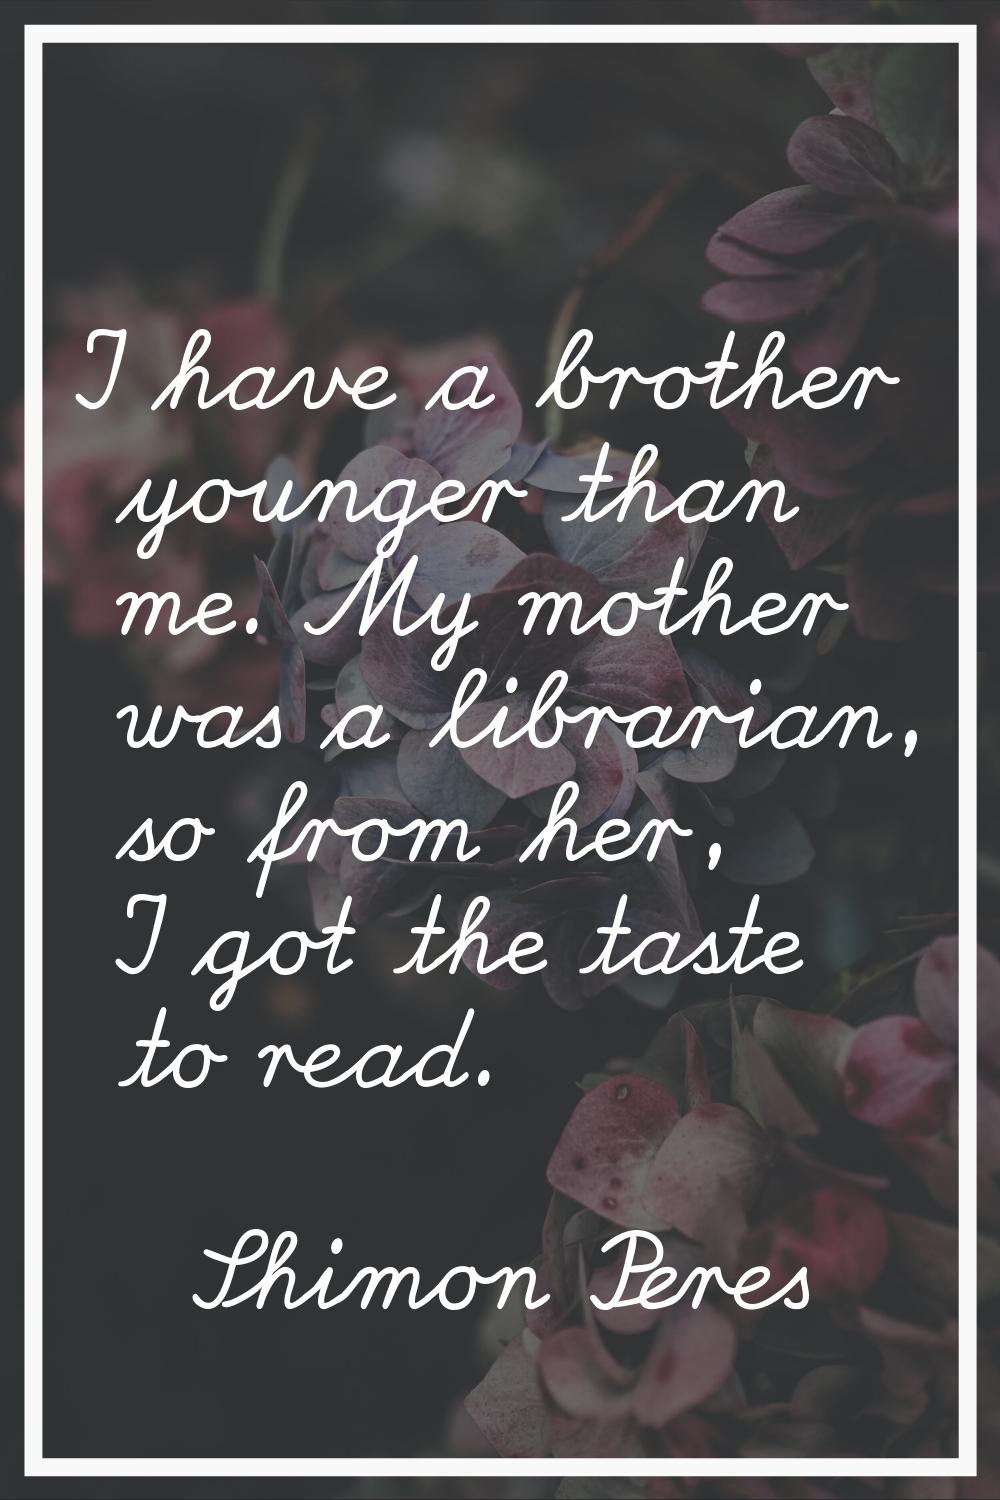 I have a brother younger than me. My mother was a librarian, so from her, I got the taste to read.